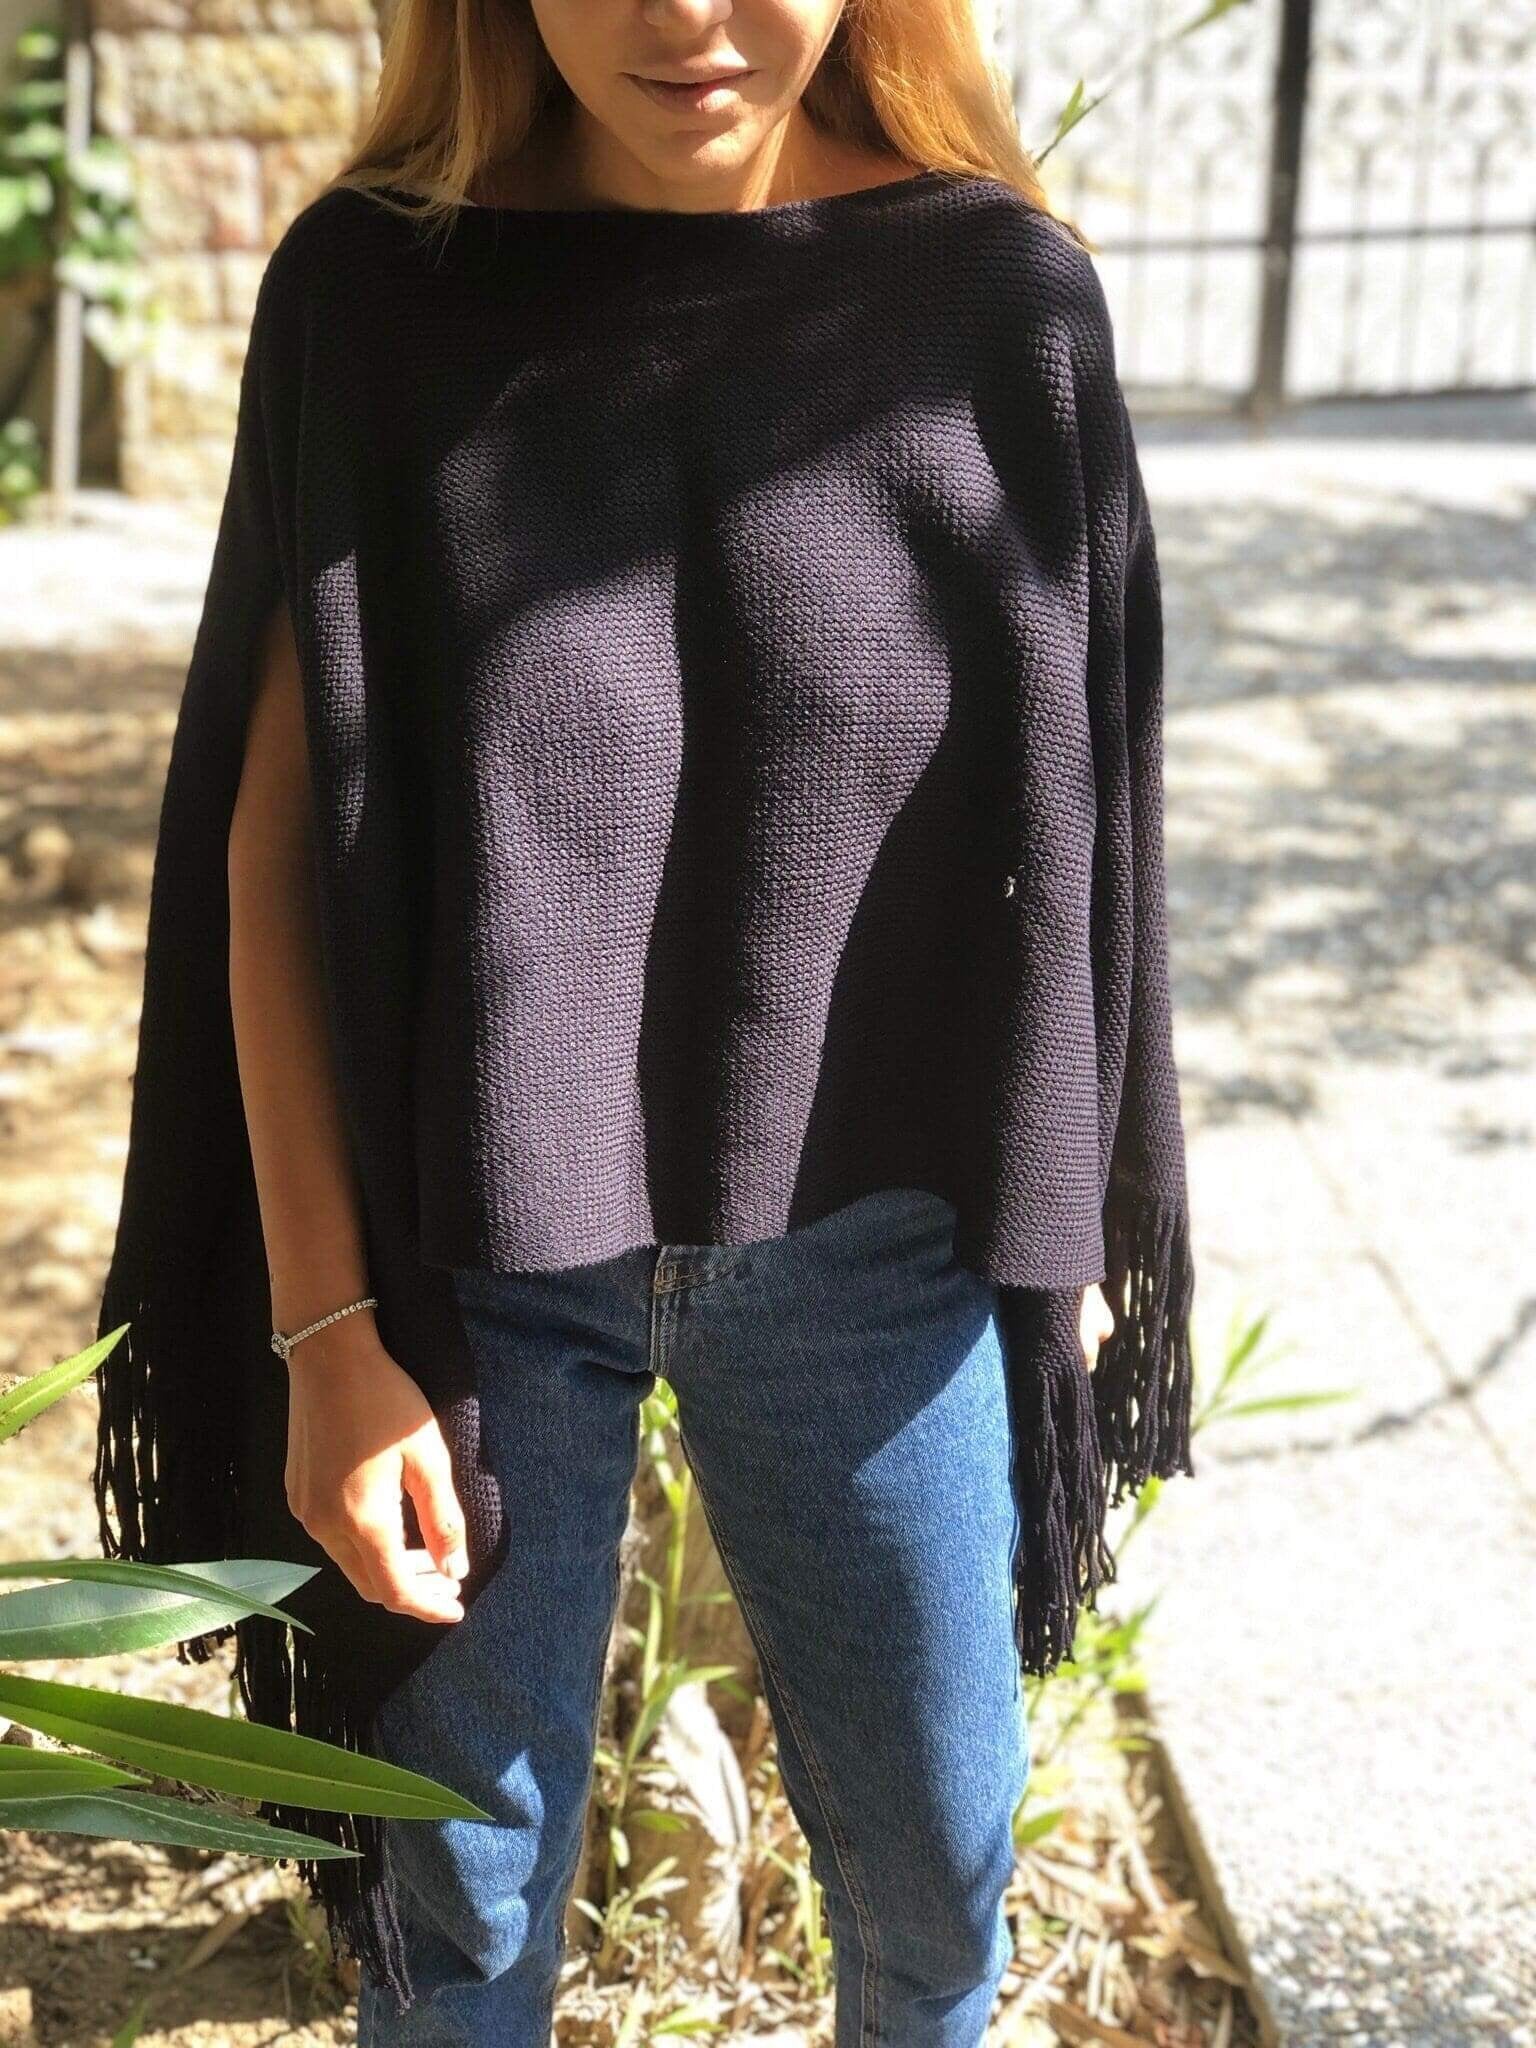 Treat your mom to a special gift with our Navy Blue Mercerize Cotton Large Poncho Cardigan, perfect for any occasion.